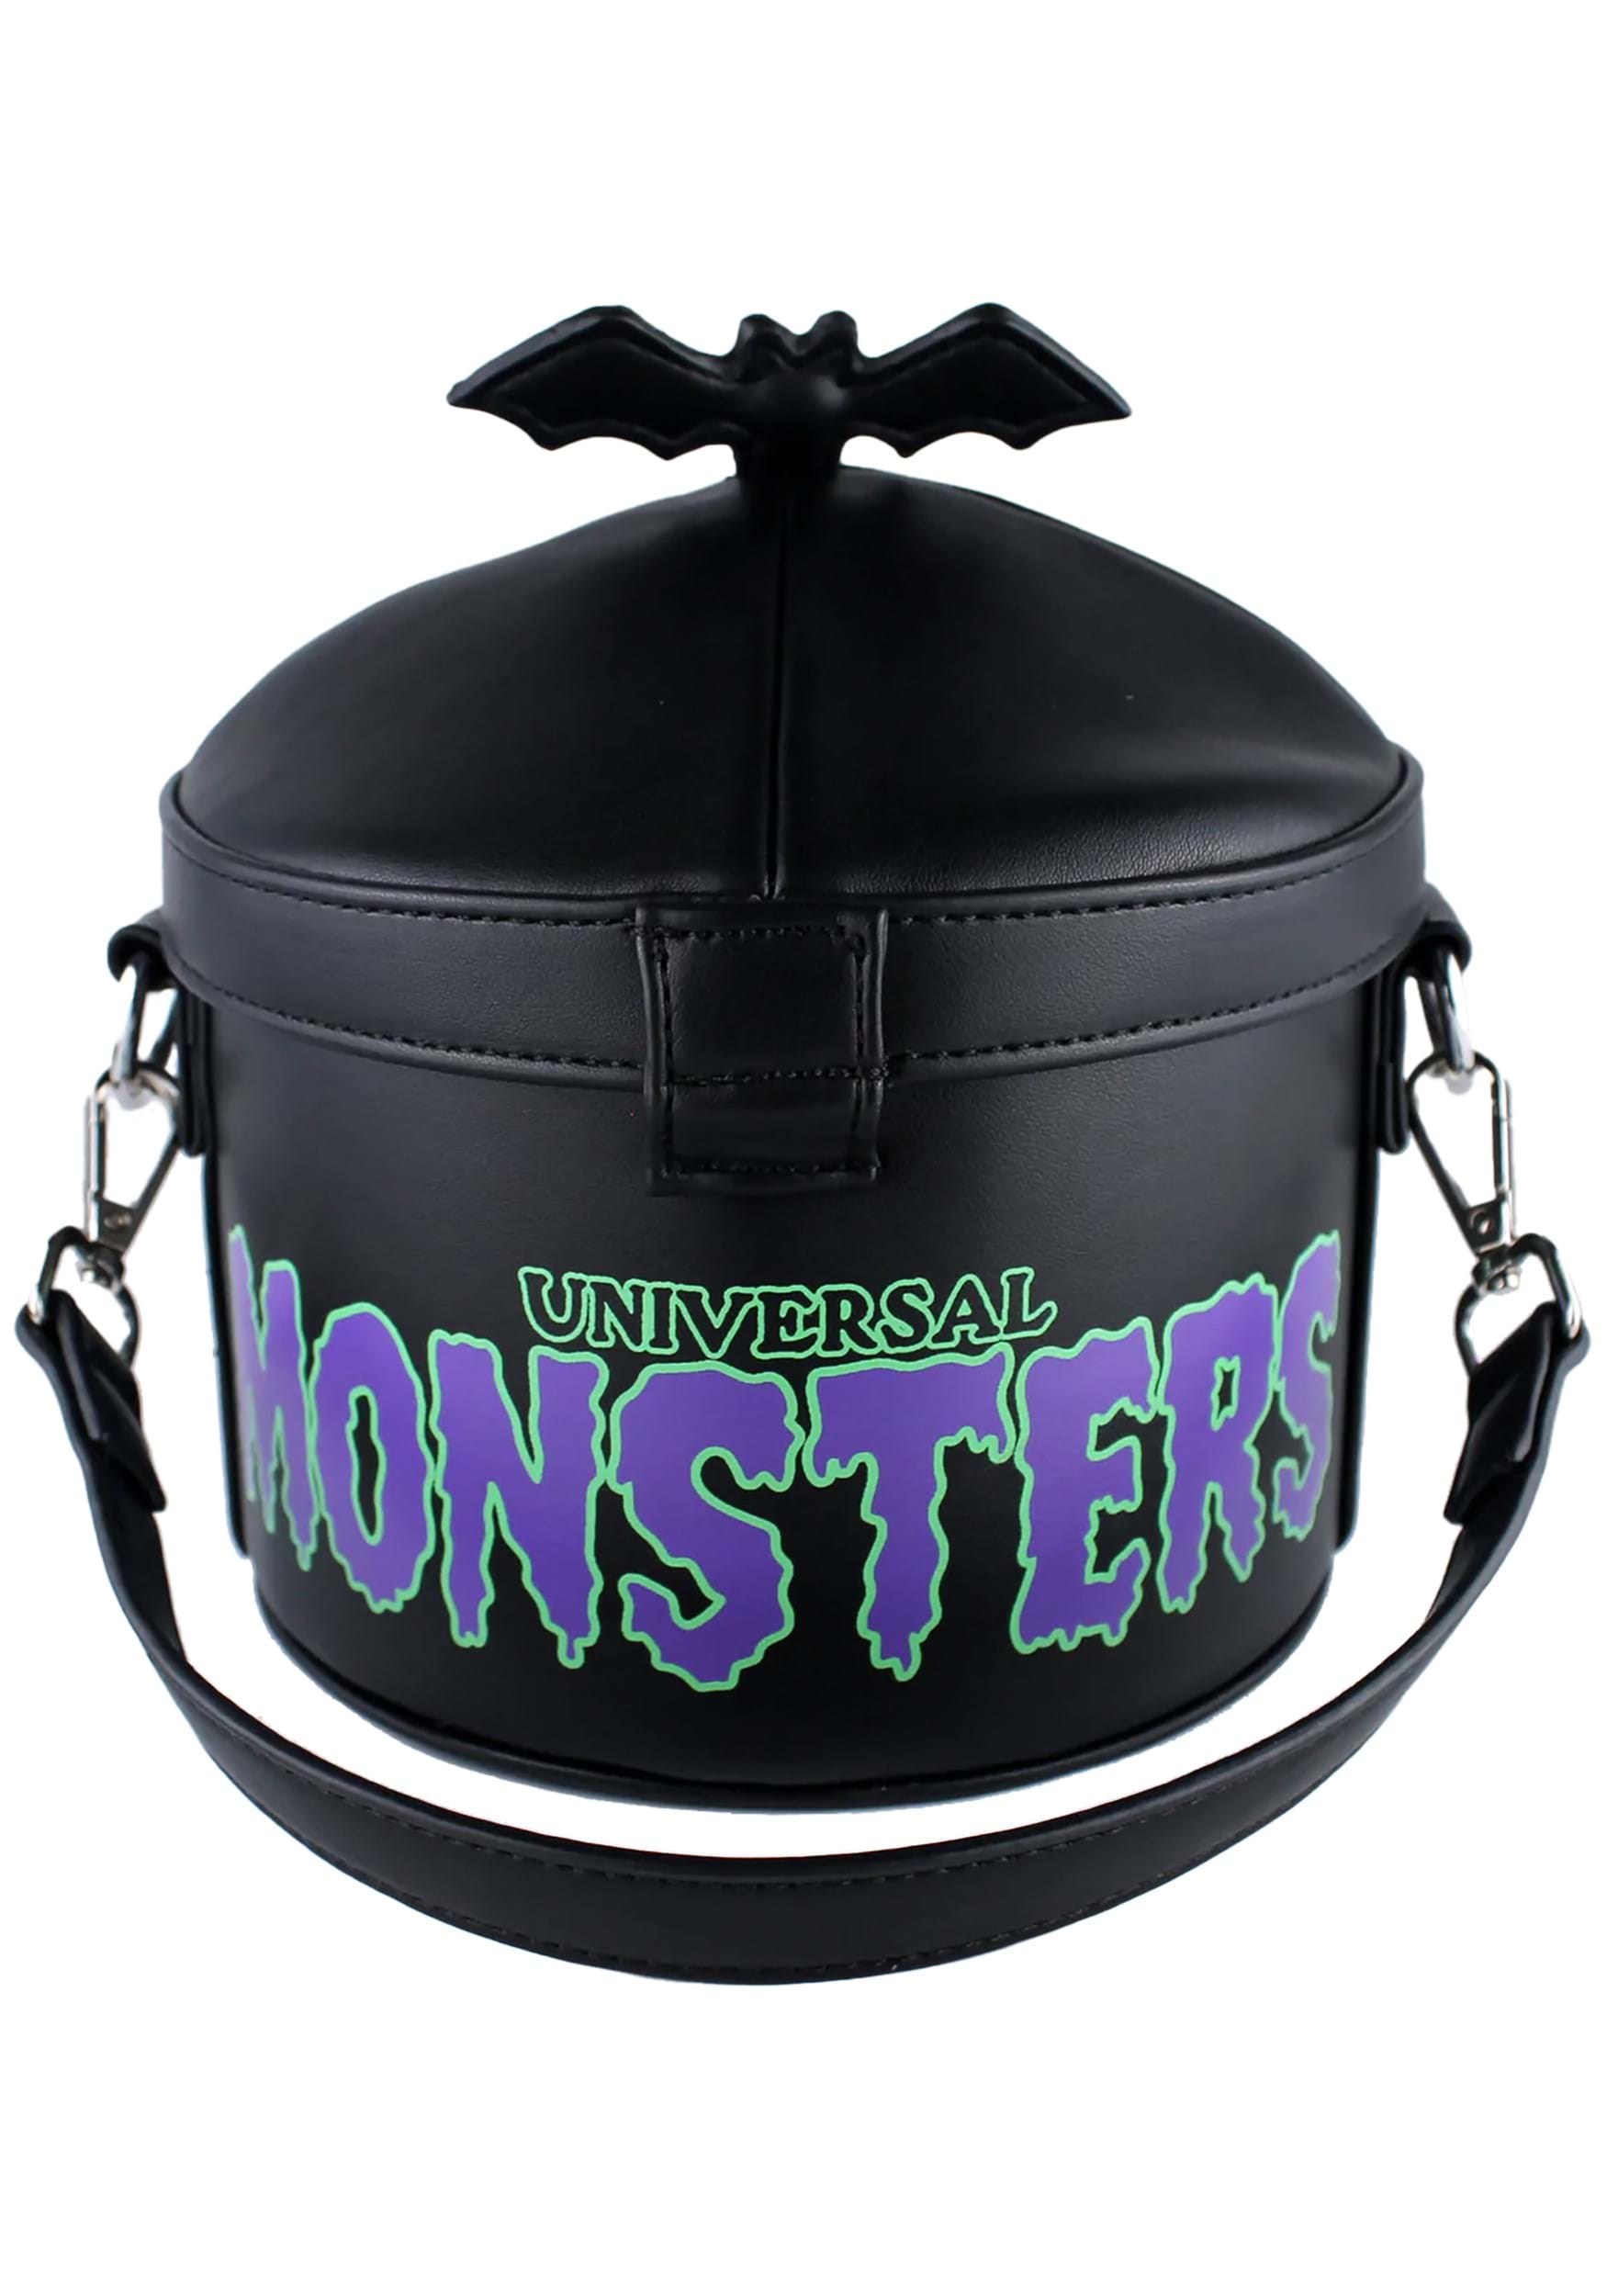 https://images.fun.com/products/88595/2-1-251050/universal-monsters-trick-or-treat-bucket-purse-alt-6.jpg